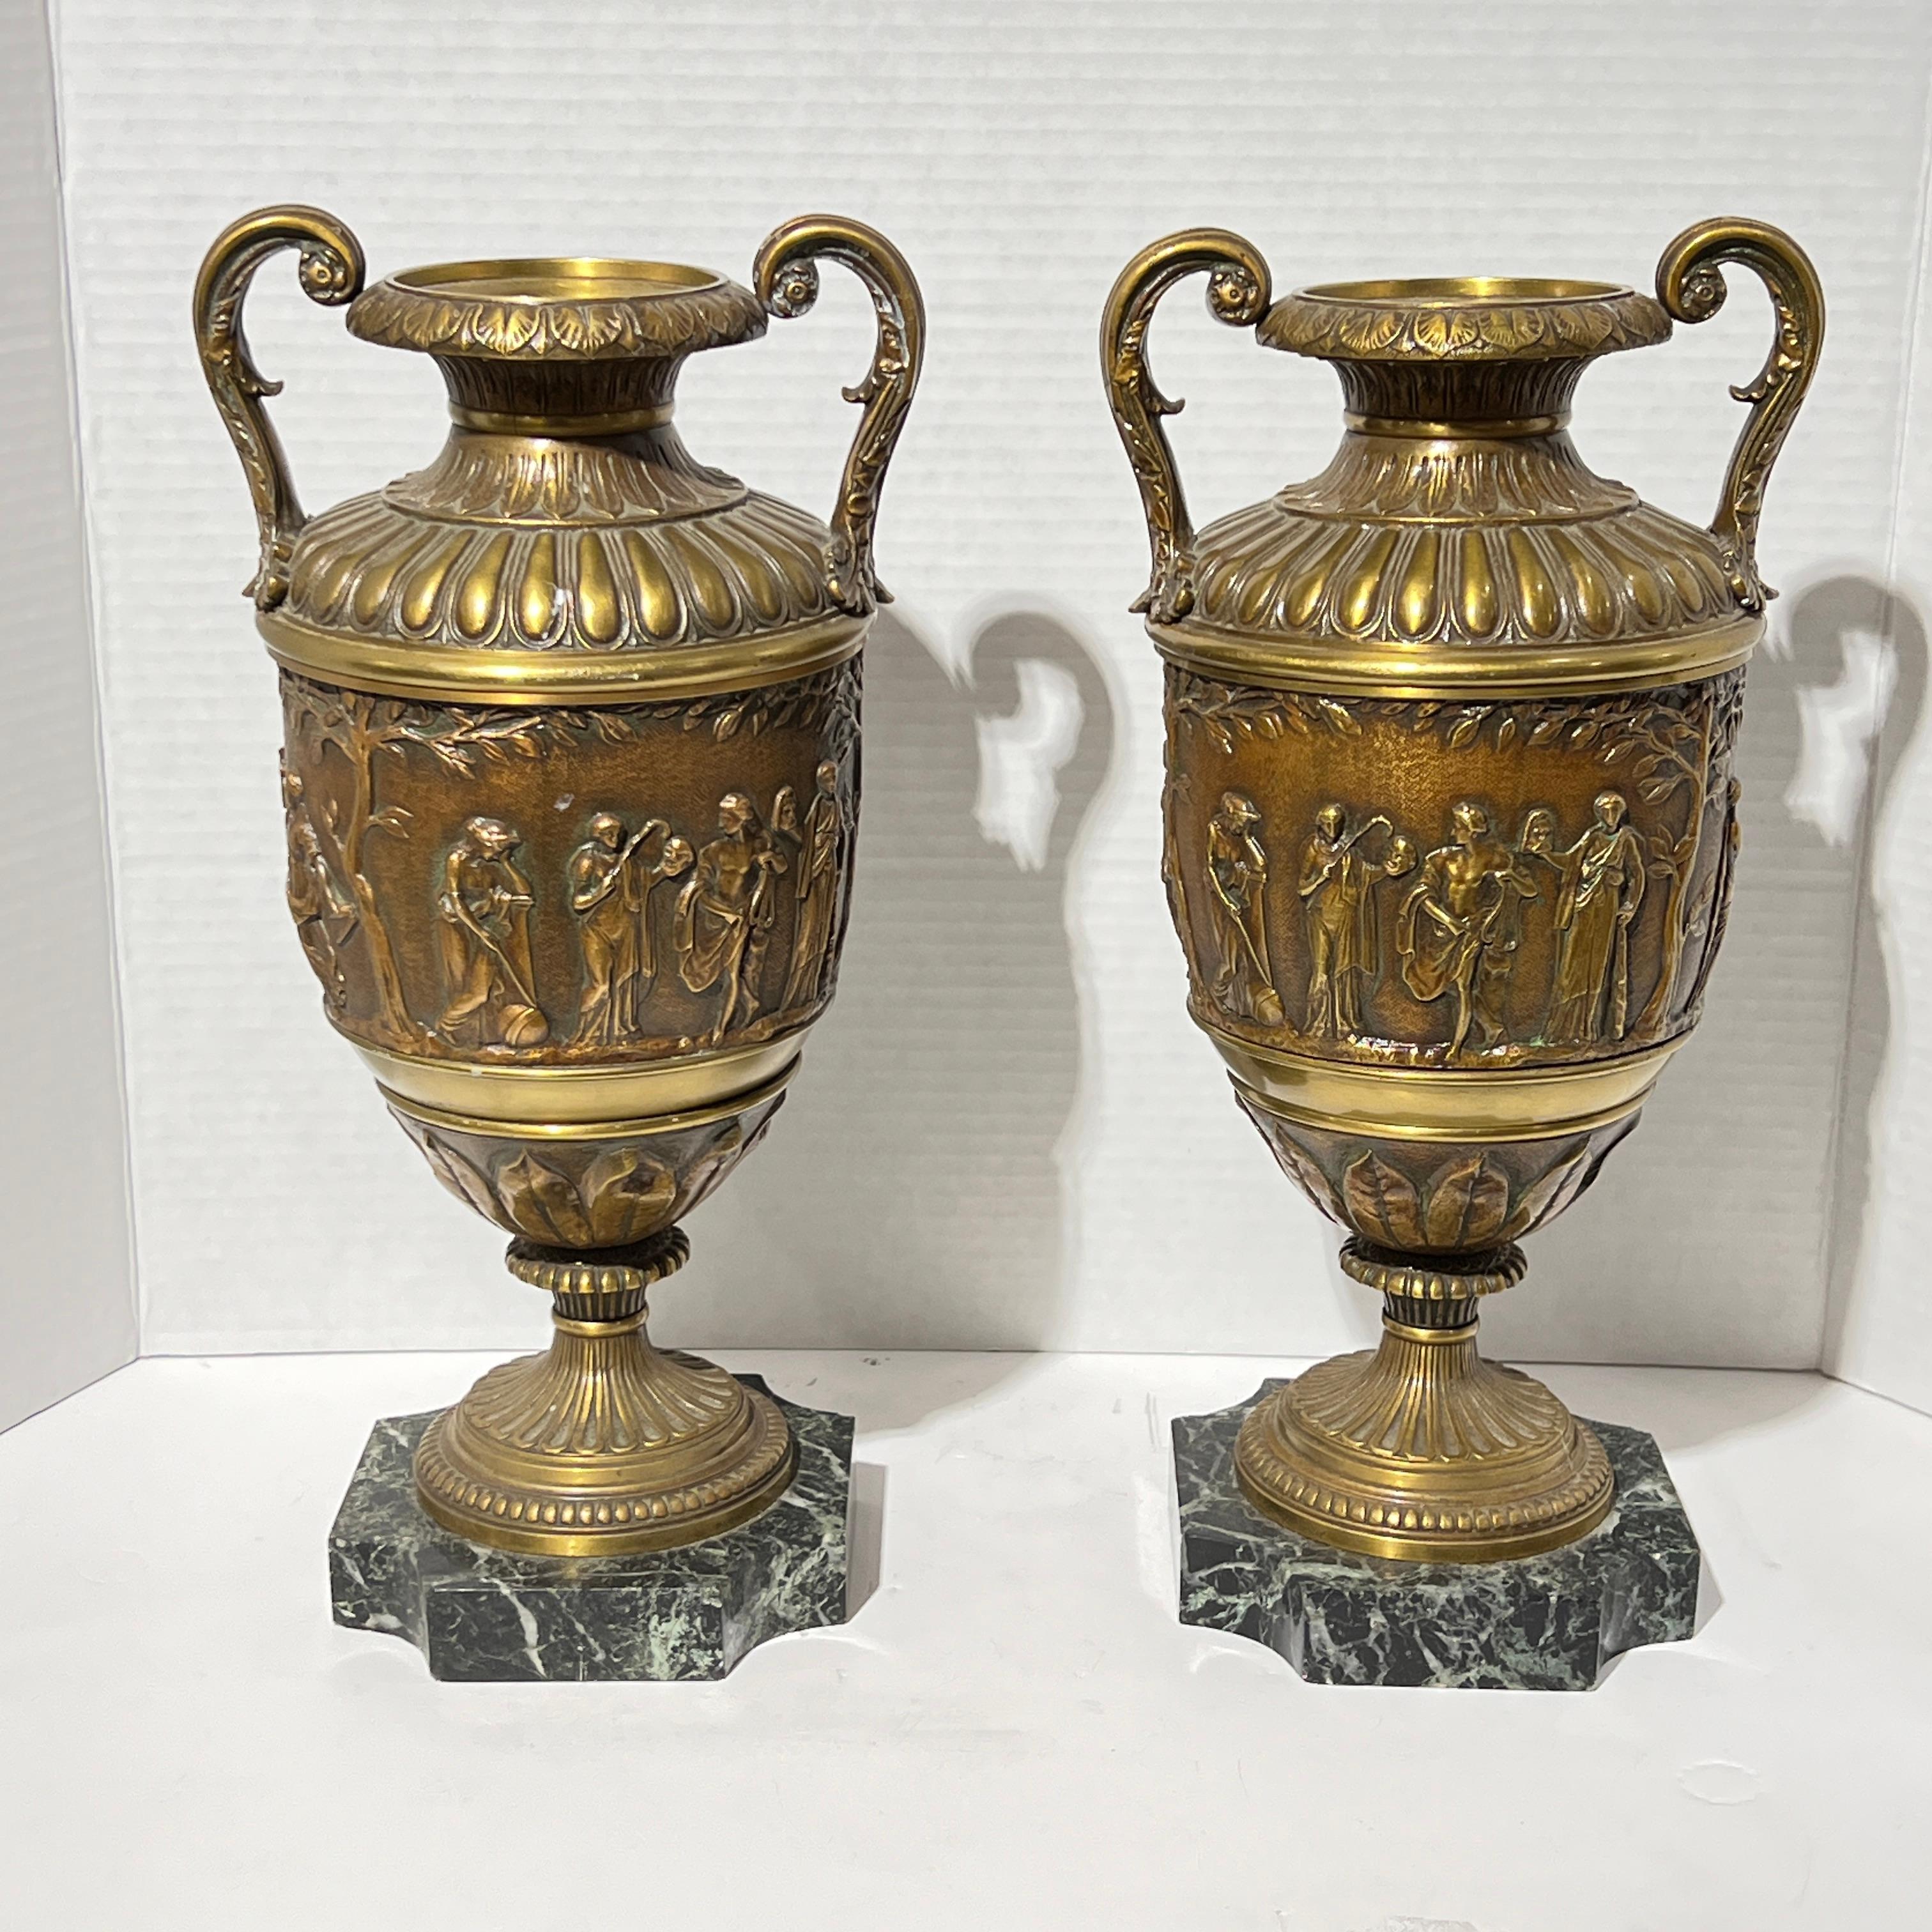 Pair of antique (19th century) bronze urns in the Greco-Roman style with frieze decorated with procession of classical figures, mounted on marble bases.